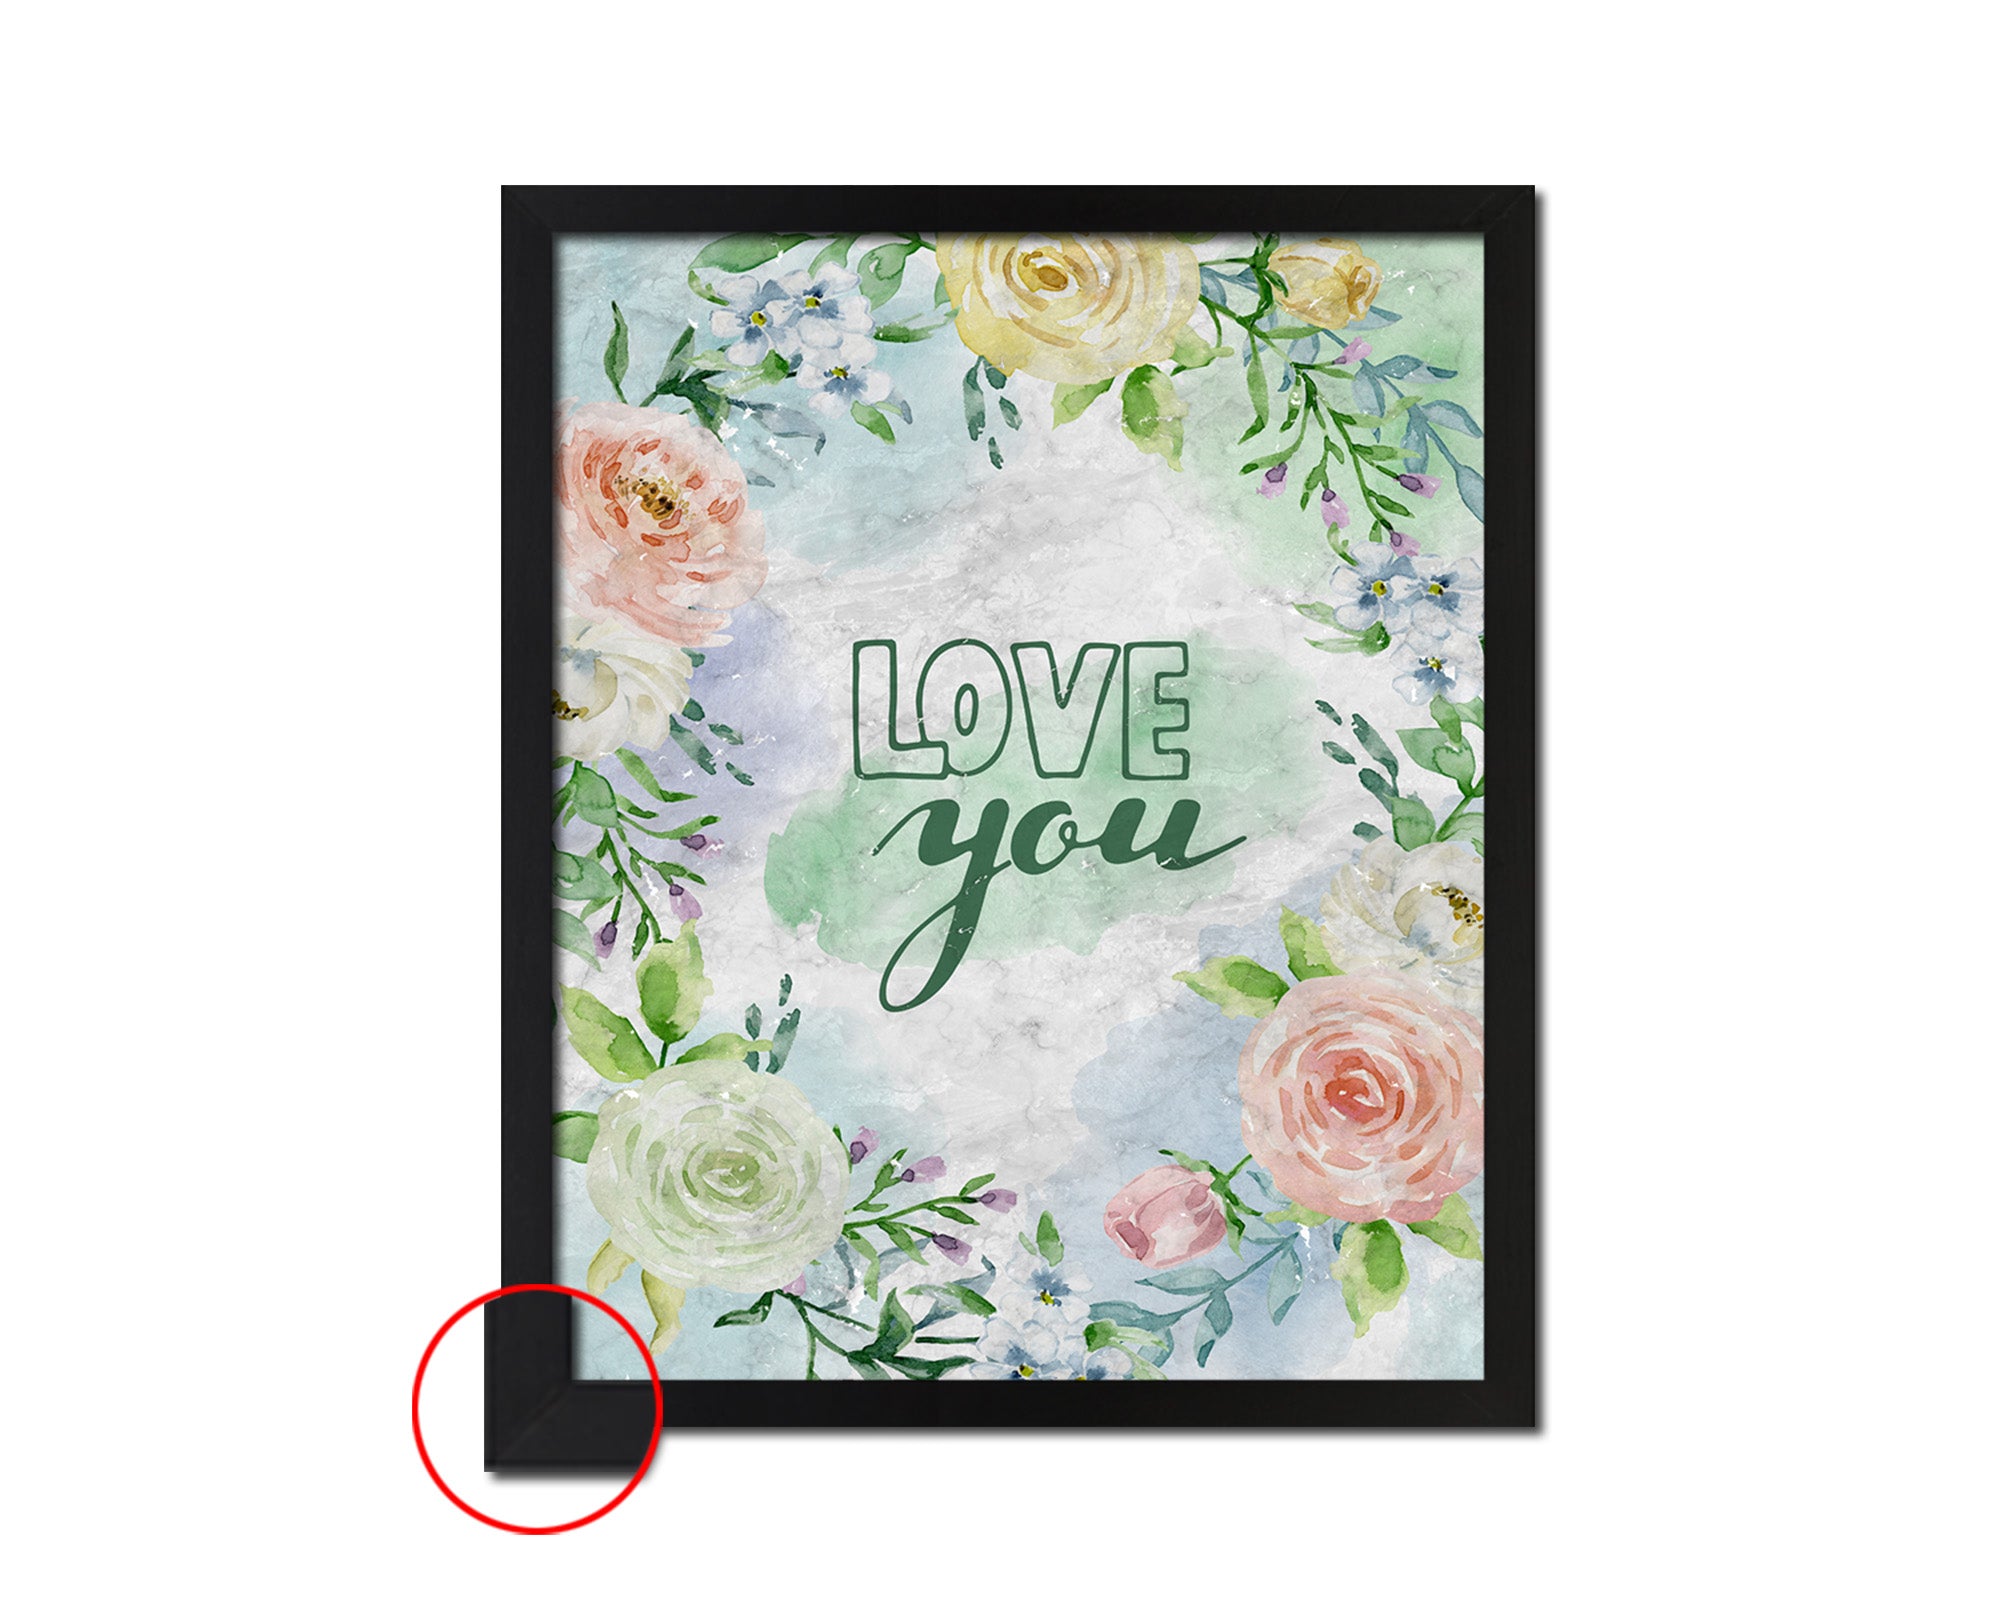 Love you Quote Framed Print Wall Art Decor Gifts